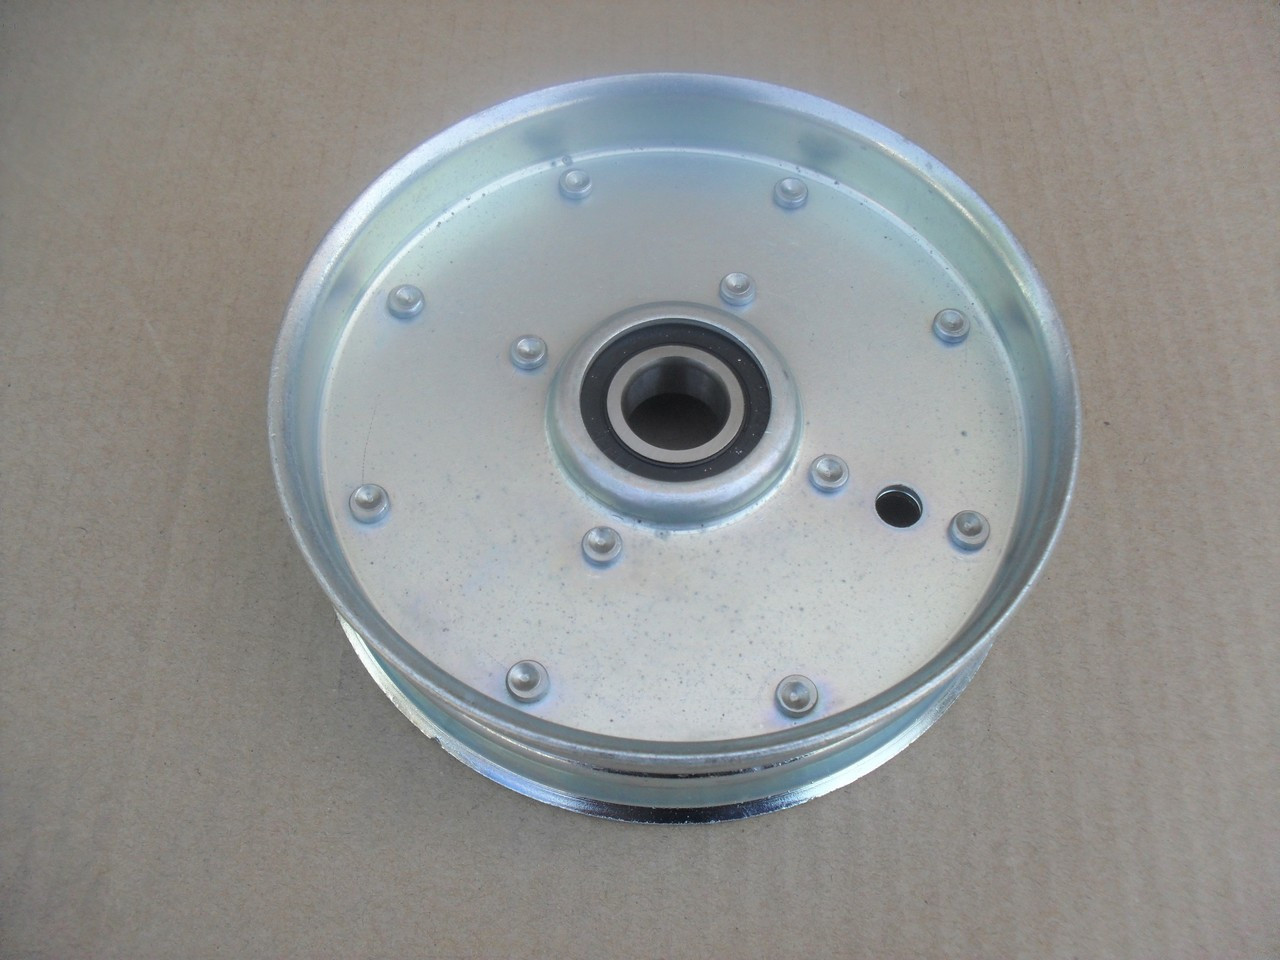 Flat Idler Pulley for Scag Sabre Tooth Tiger 48198 483211 Height 1-7/16" ID 3/8" OD 5-1/4"